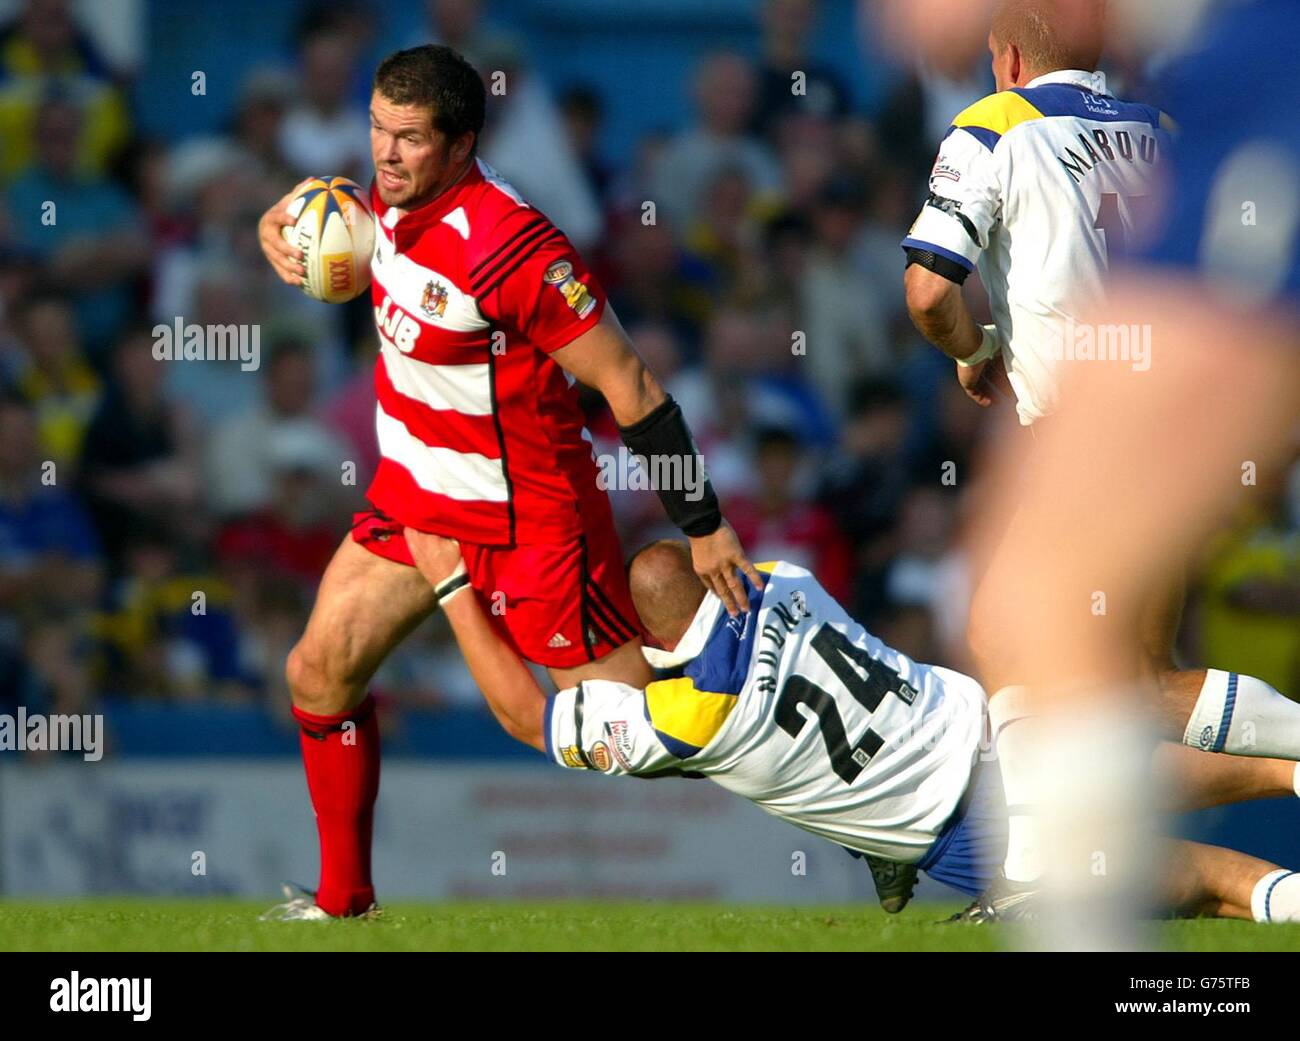 Wigan's Andy Farrell holds off a diving tackle from Warrington's Paul Noone during the Tetley's Bitter Super League match at Wilderspool stadium, Warrington. Stock Photo